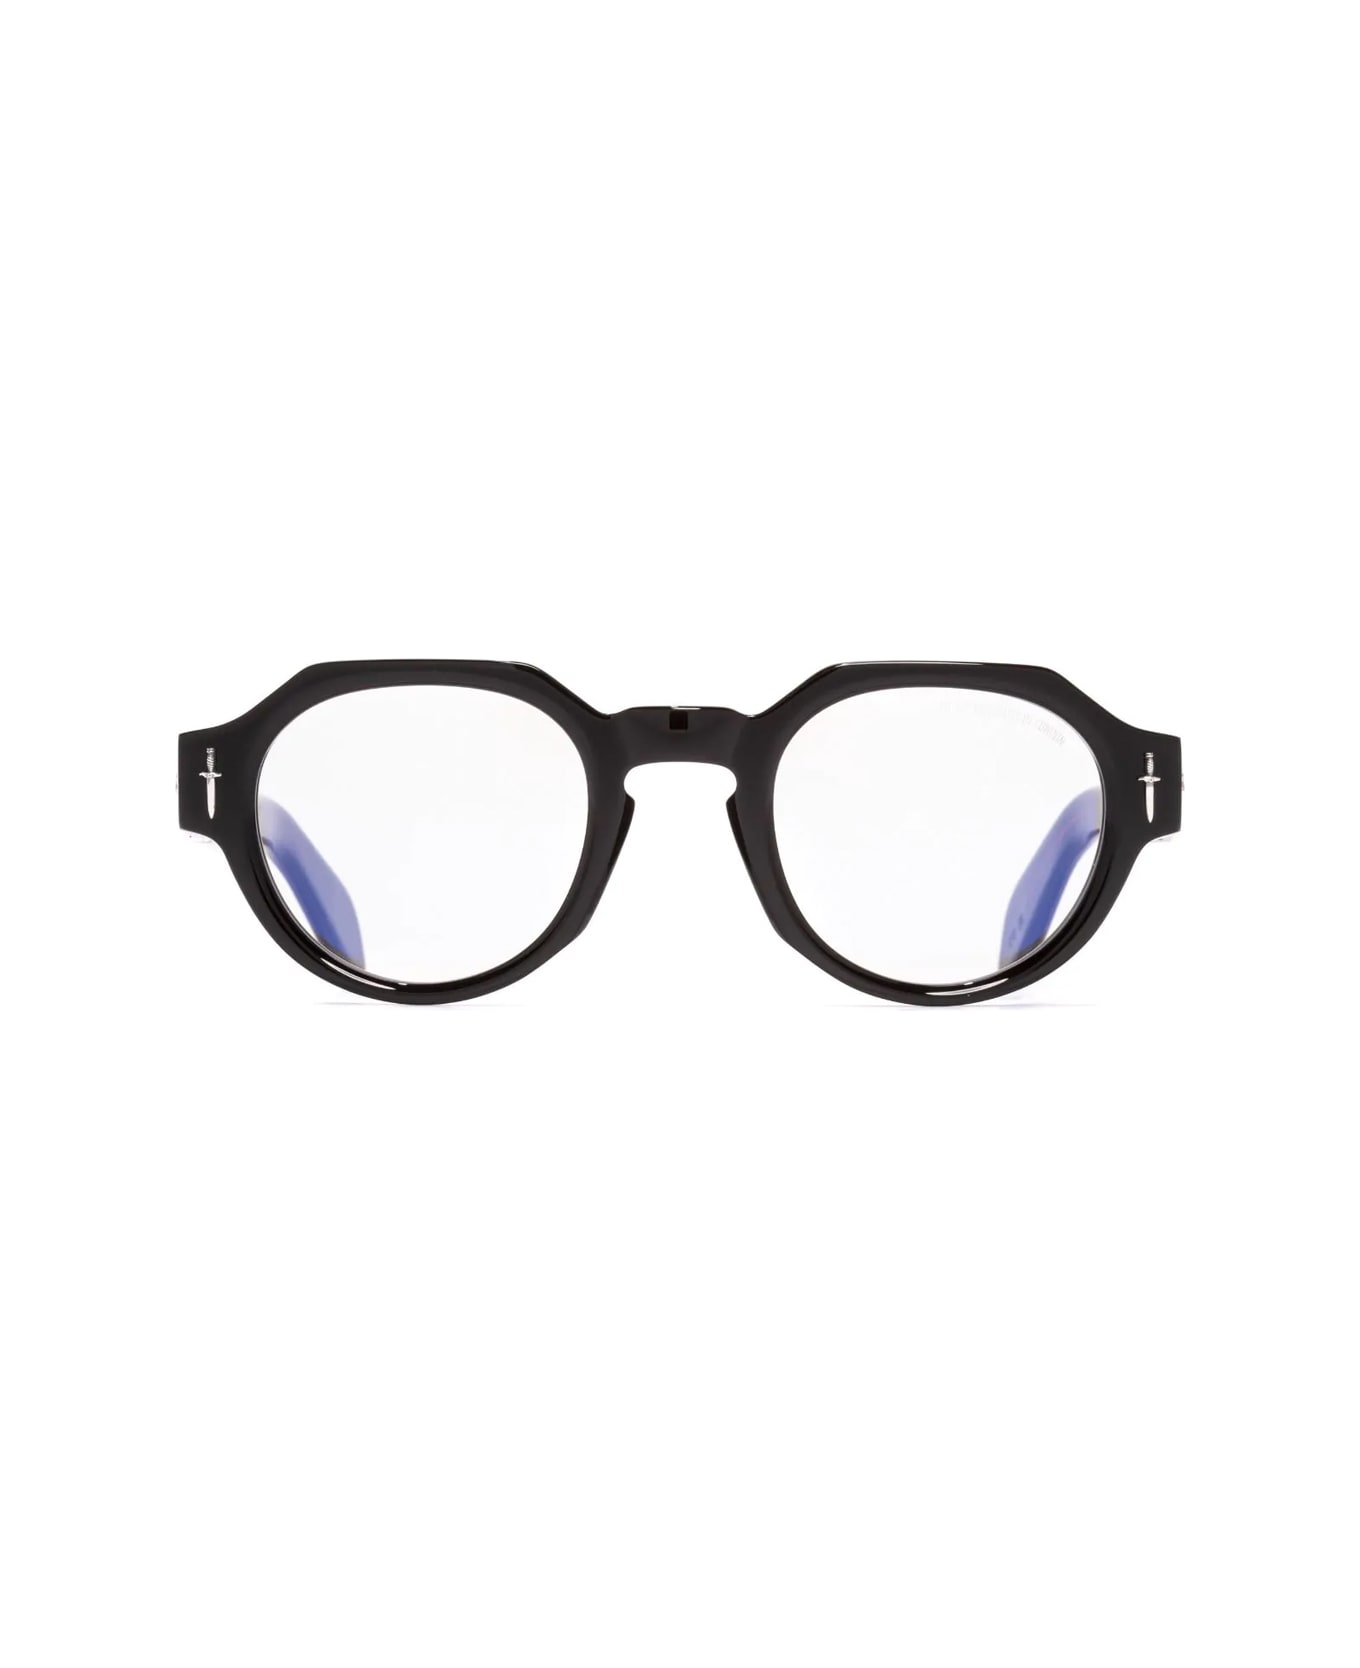 Cutler and Gross Great Frog 006 01 Glasses - Nero